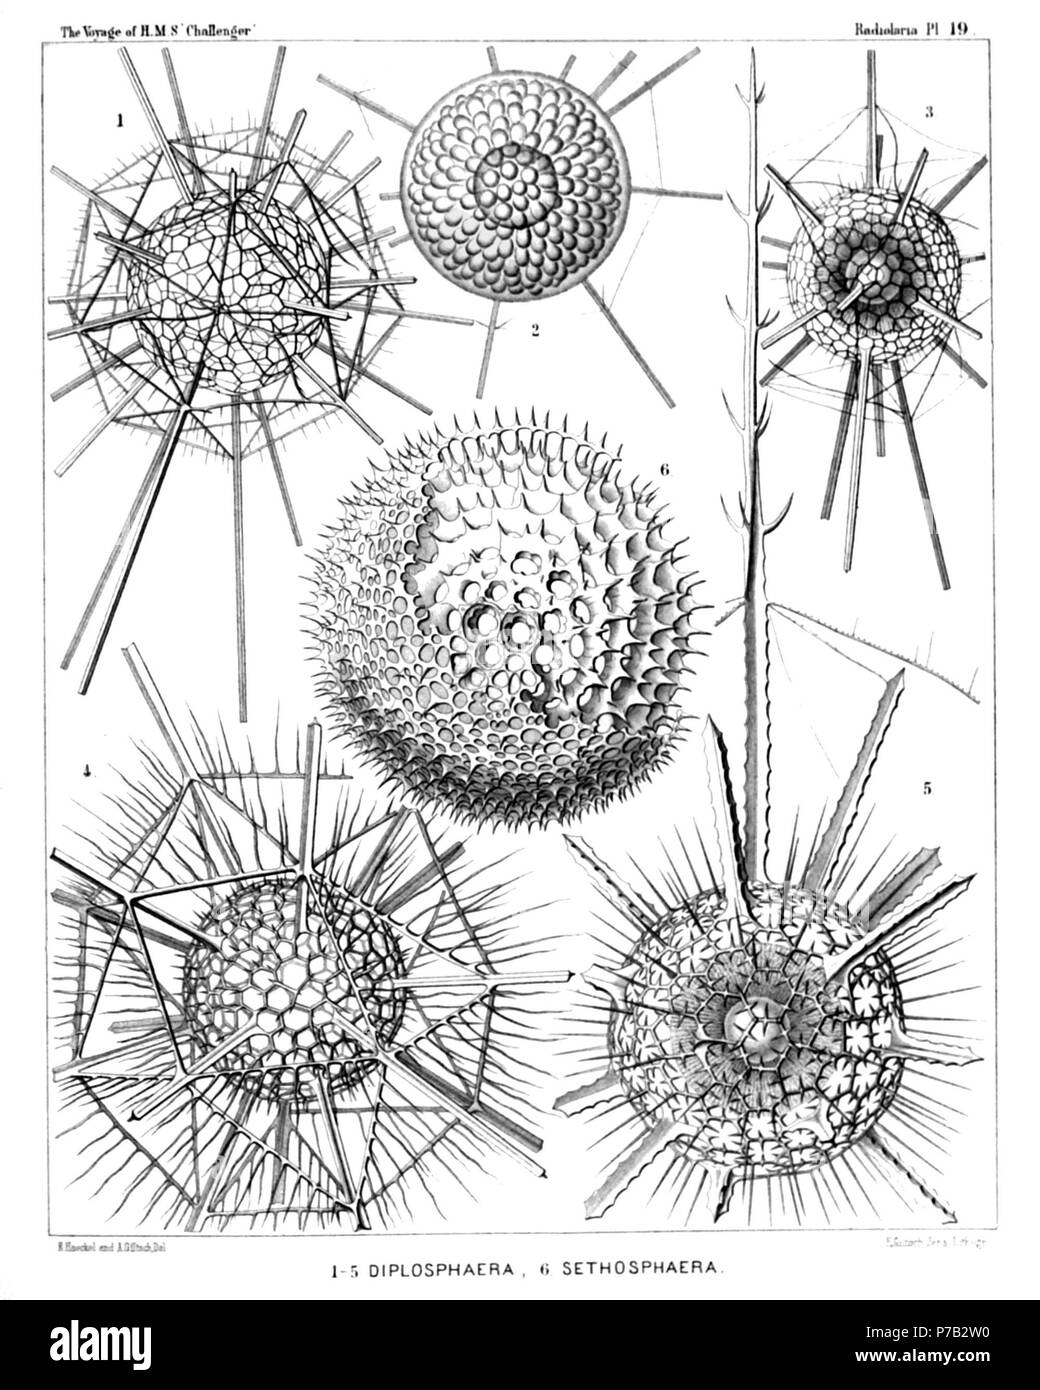 English: Illustration from Report on the Radiolaria collected by H.M.S. Challenger during the years 1873-1876. Part III. Original description follows:  Plate 19. Astrosphærida.  Diam.  Fig. 1. Drymosphæra polygonalis, n. sp., × 200  Fig. 2. Leptosphæra hexagonalis, n. sp., × 200  Showing the central capsule (forming numerous club-shaped protuberances) and the simple spherical nucleus in its centre. The skeleton is nearly the same as in Diplosphæra hexagonalis (fig. 3).  Fig. 3. Diplosphæra hexagonalis, n. sp., × 200  The spherical central capsule, with radially striped protoplasm, is enclosed  Stock Photo